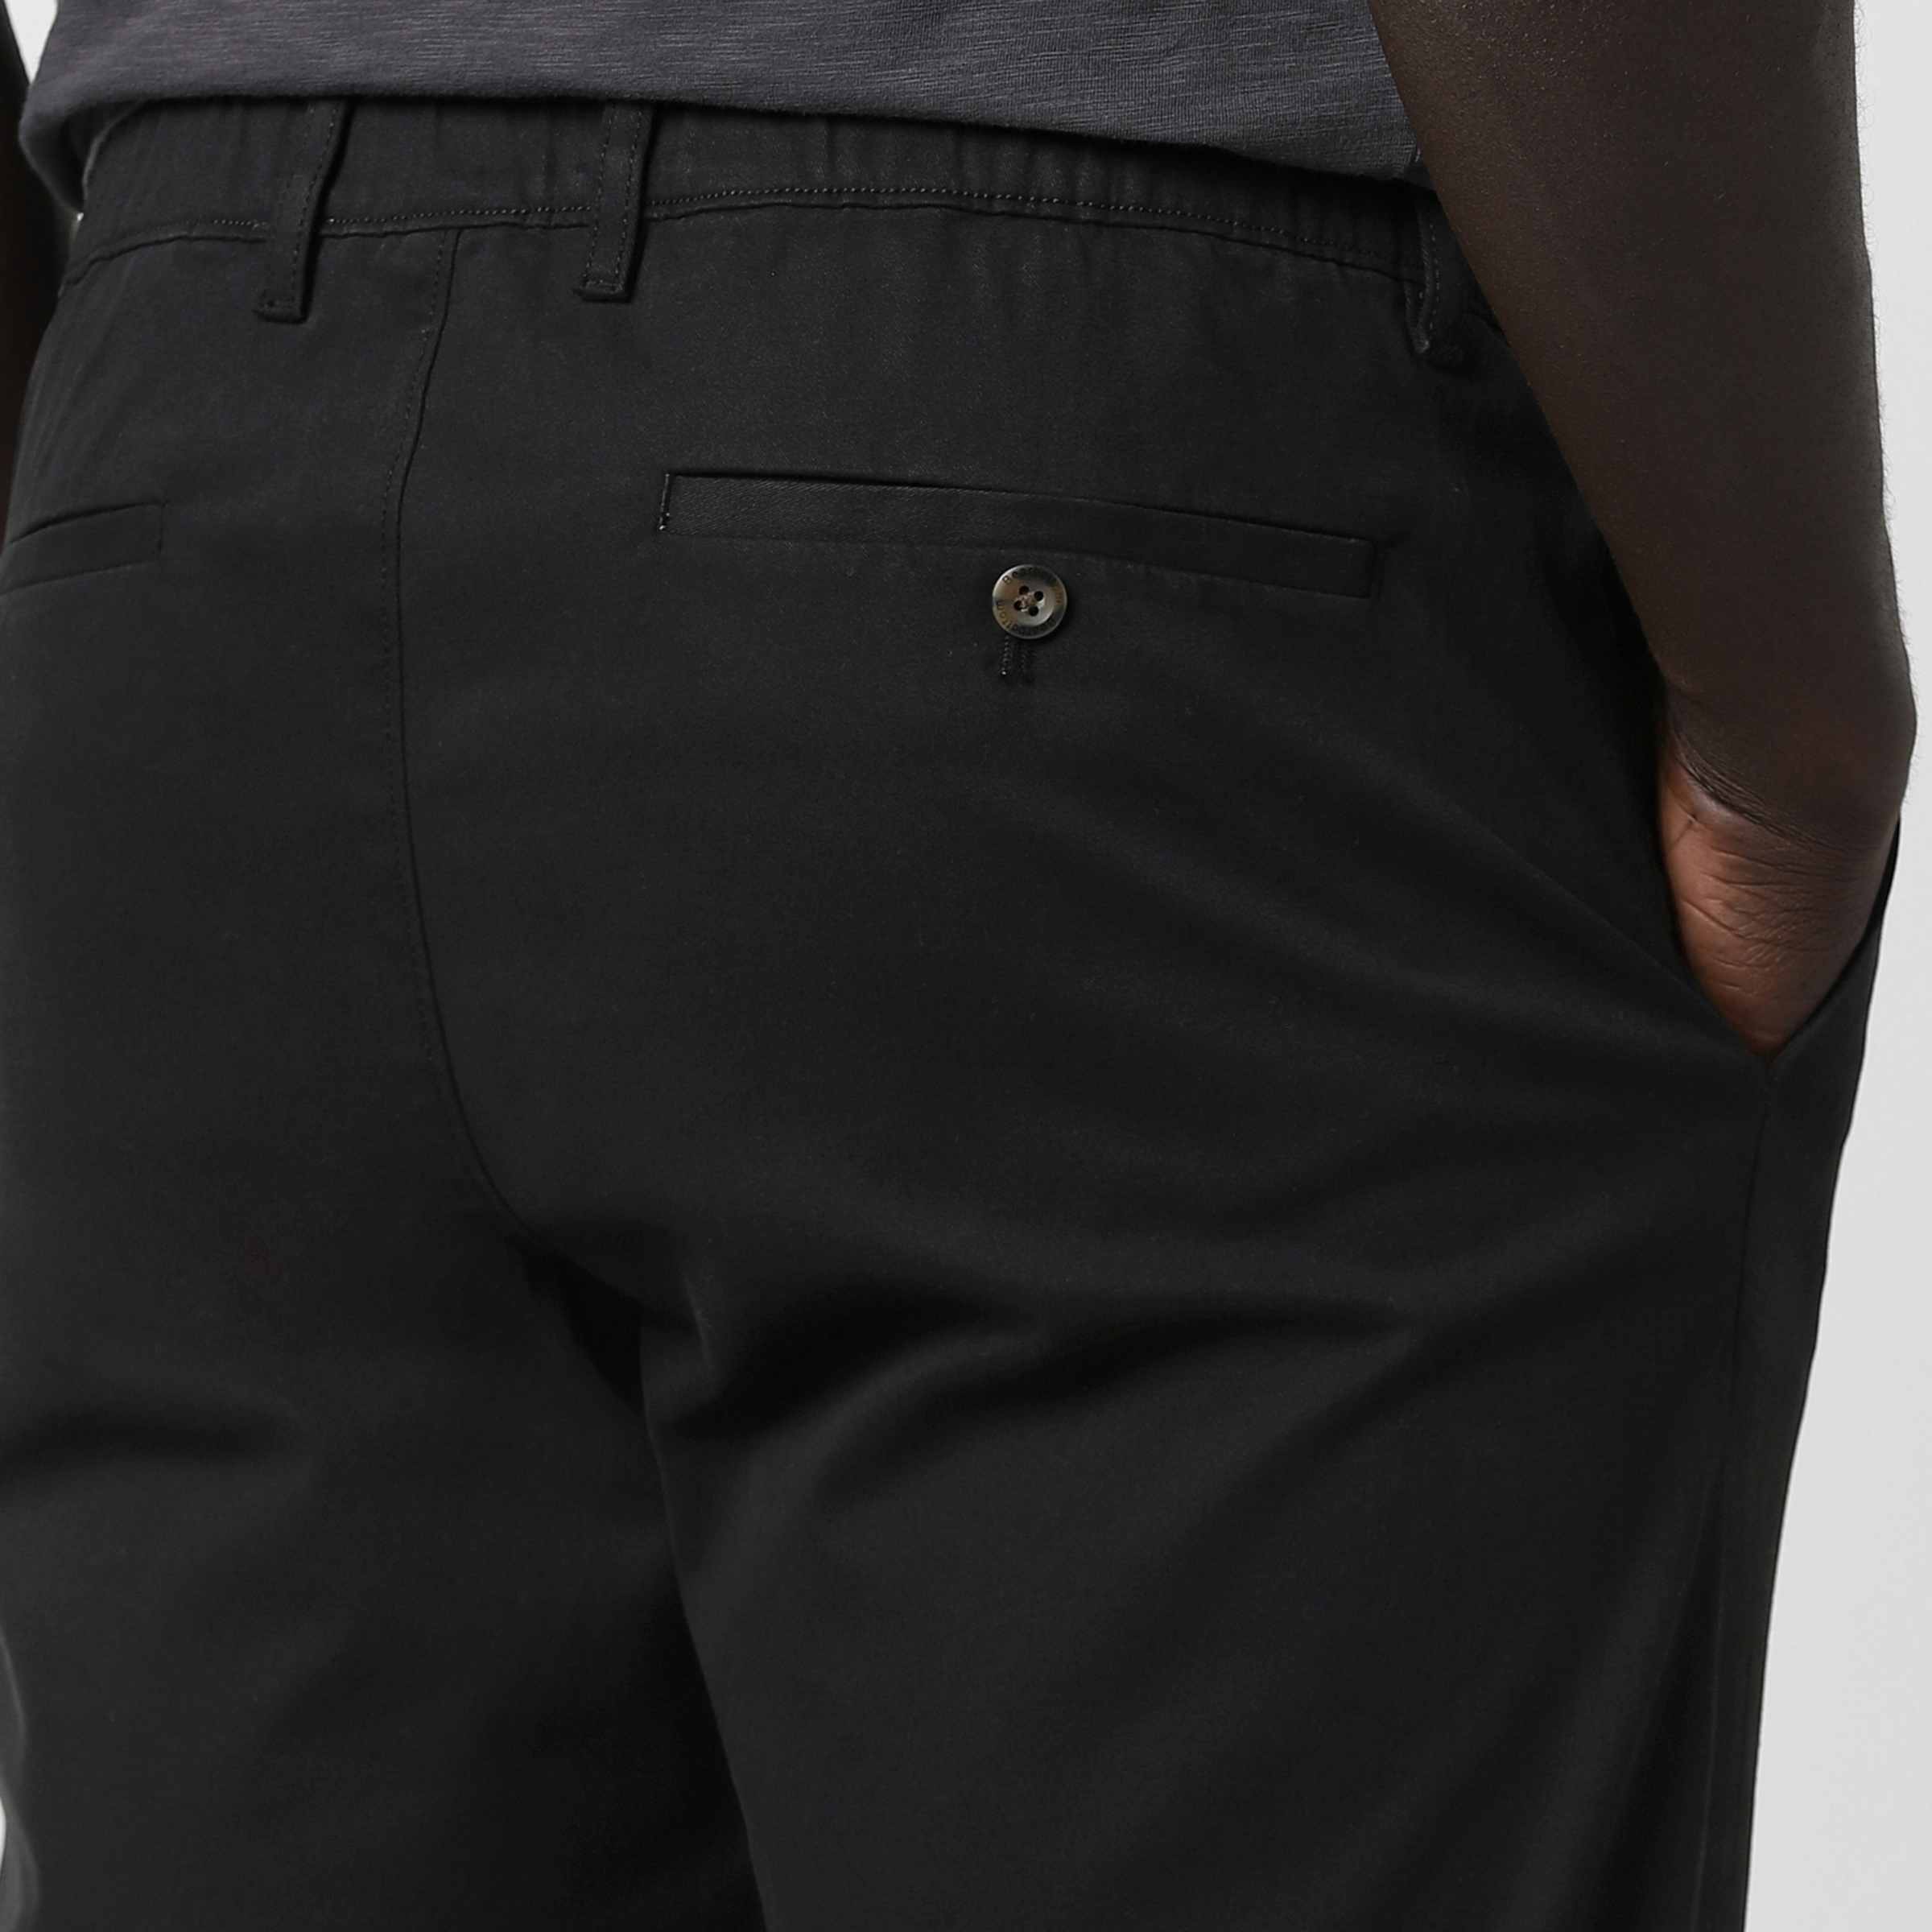 Relaxed Stretch Chino Pant Black close up back right pocket on model